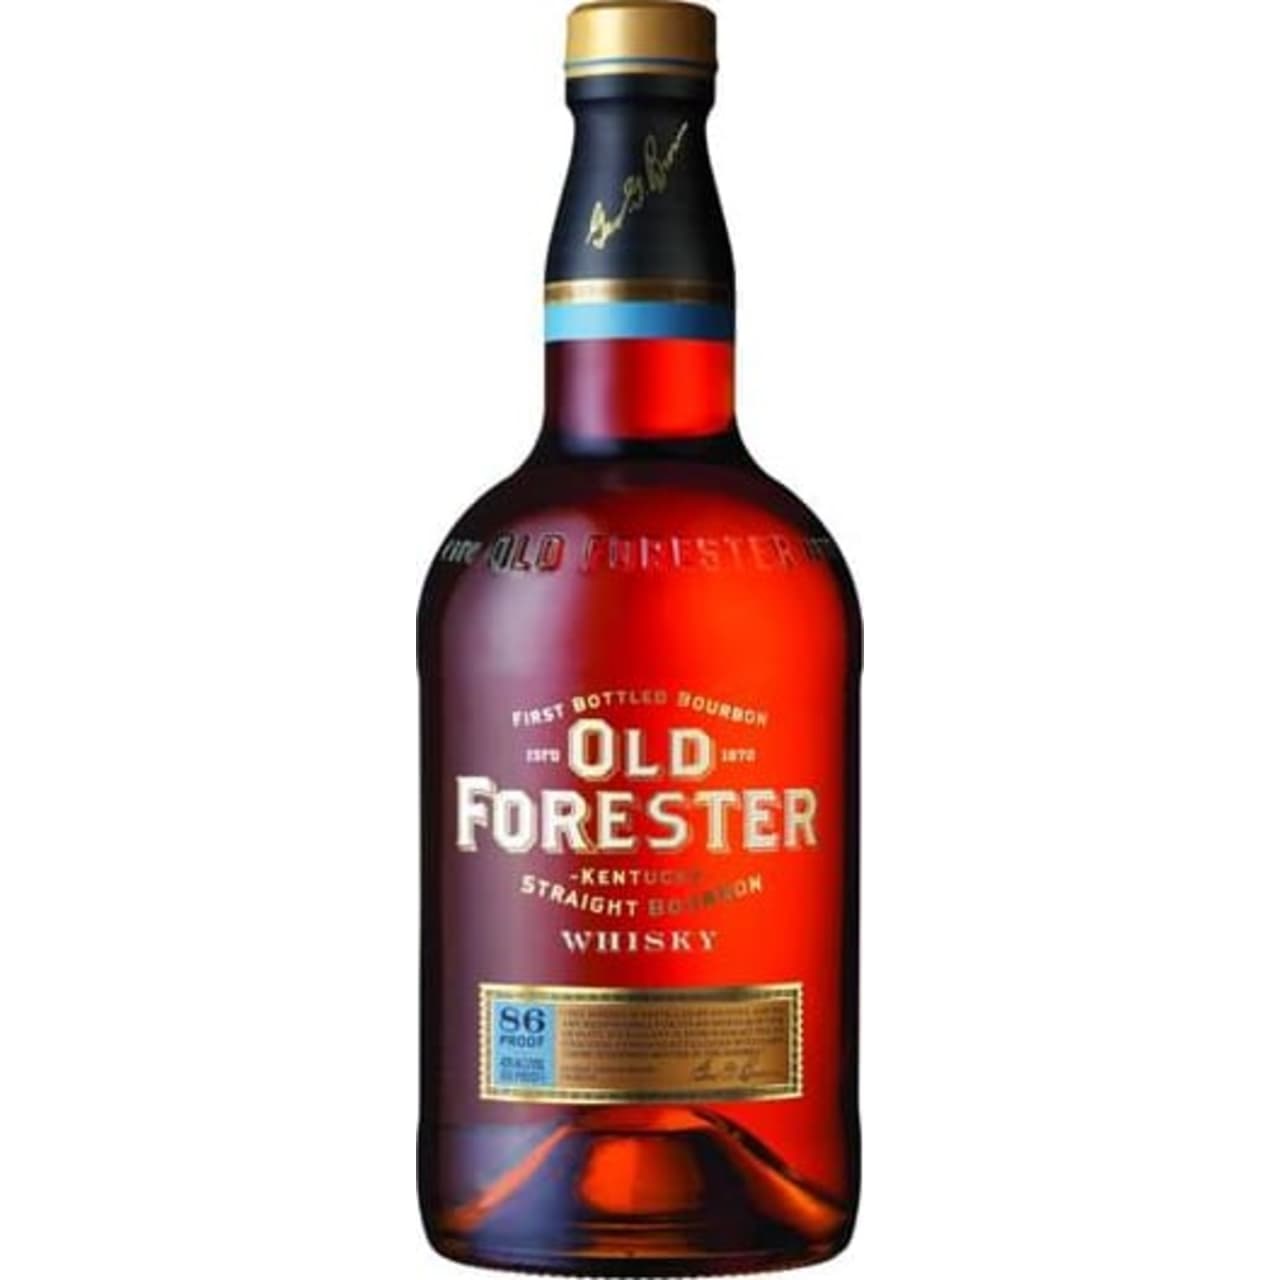 Old Forester is twice-distilled, first in a column still, then again using a thumper still. The new whiskey is transferred to new oak barrels and matured for a minimum of 2 years in a specially designed rickhouse.